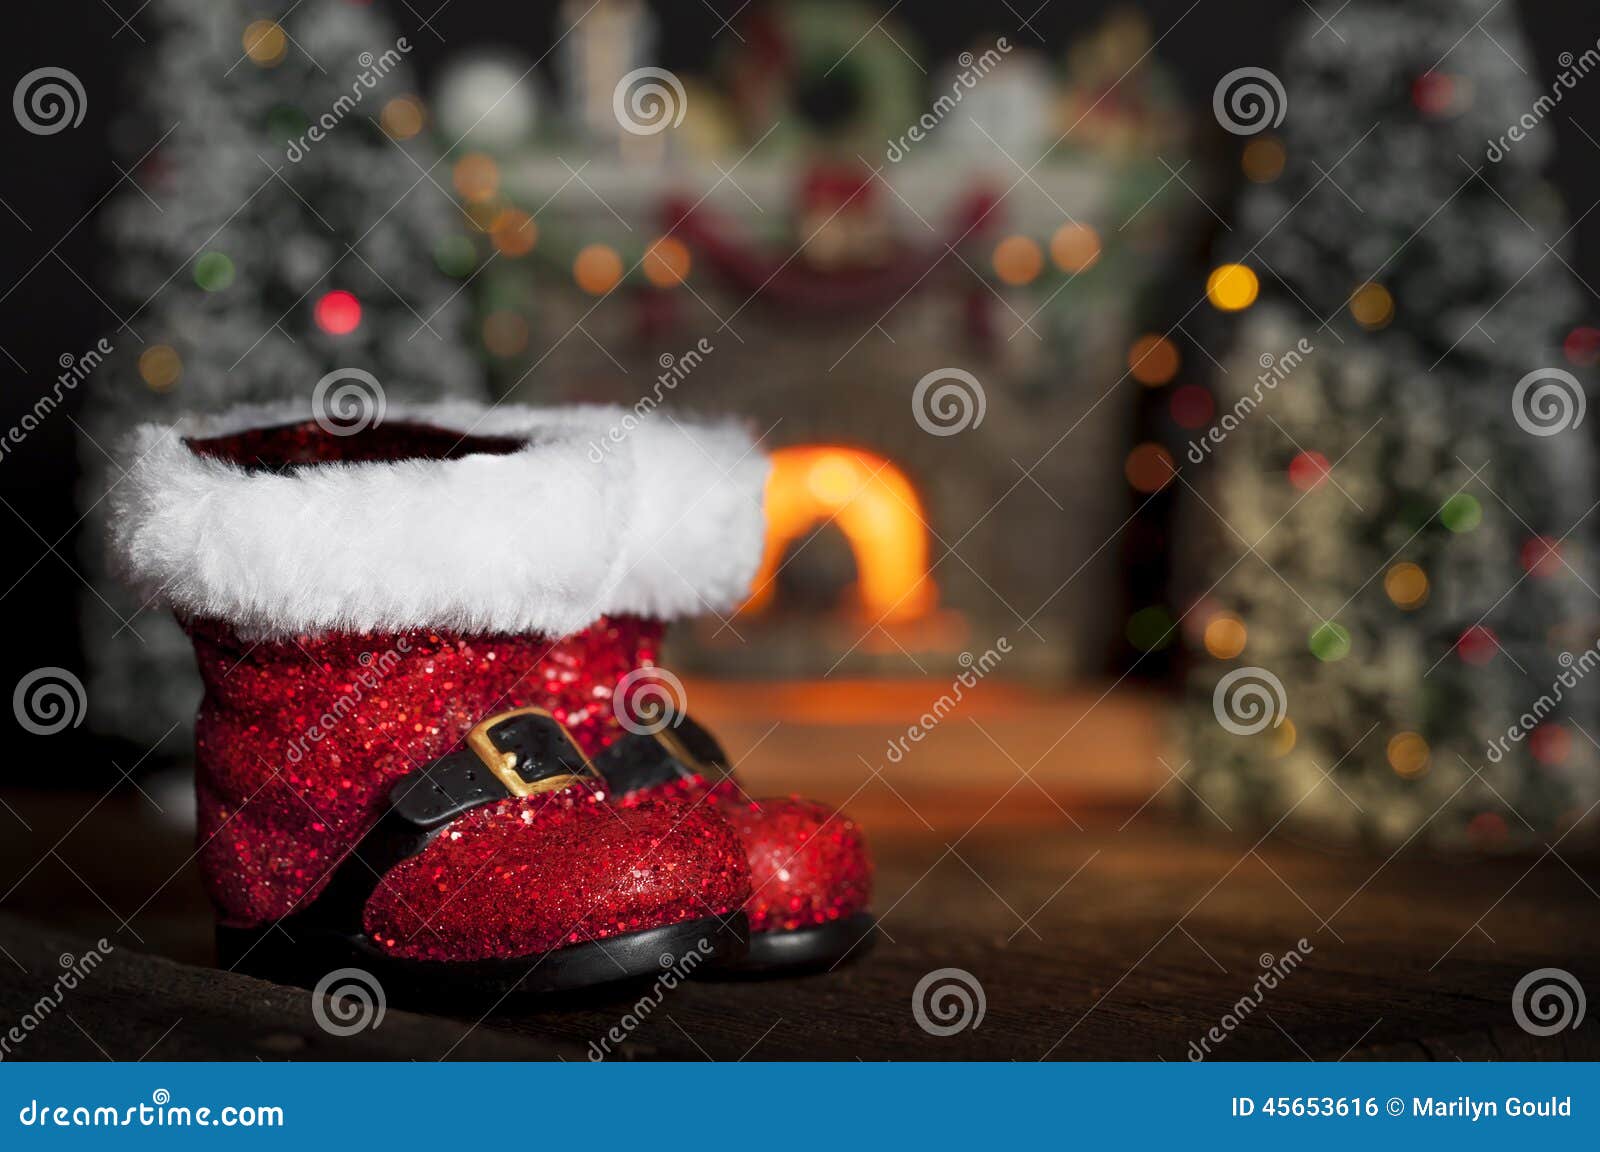 Santa Boots Fireplace stock photo. Image of boots, gould - 45653616